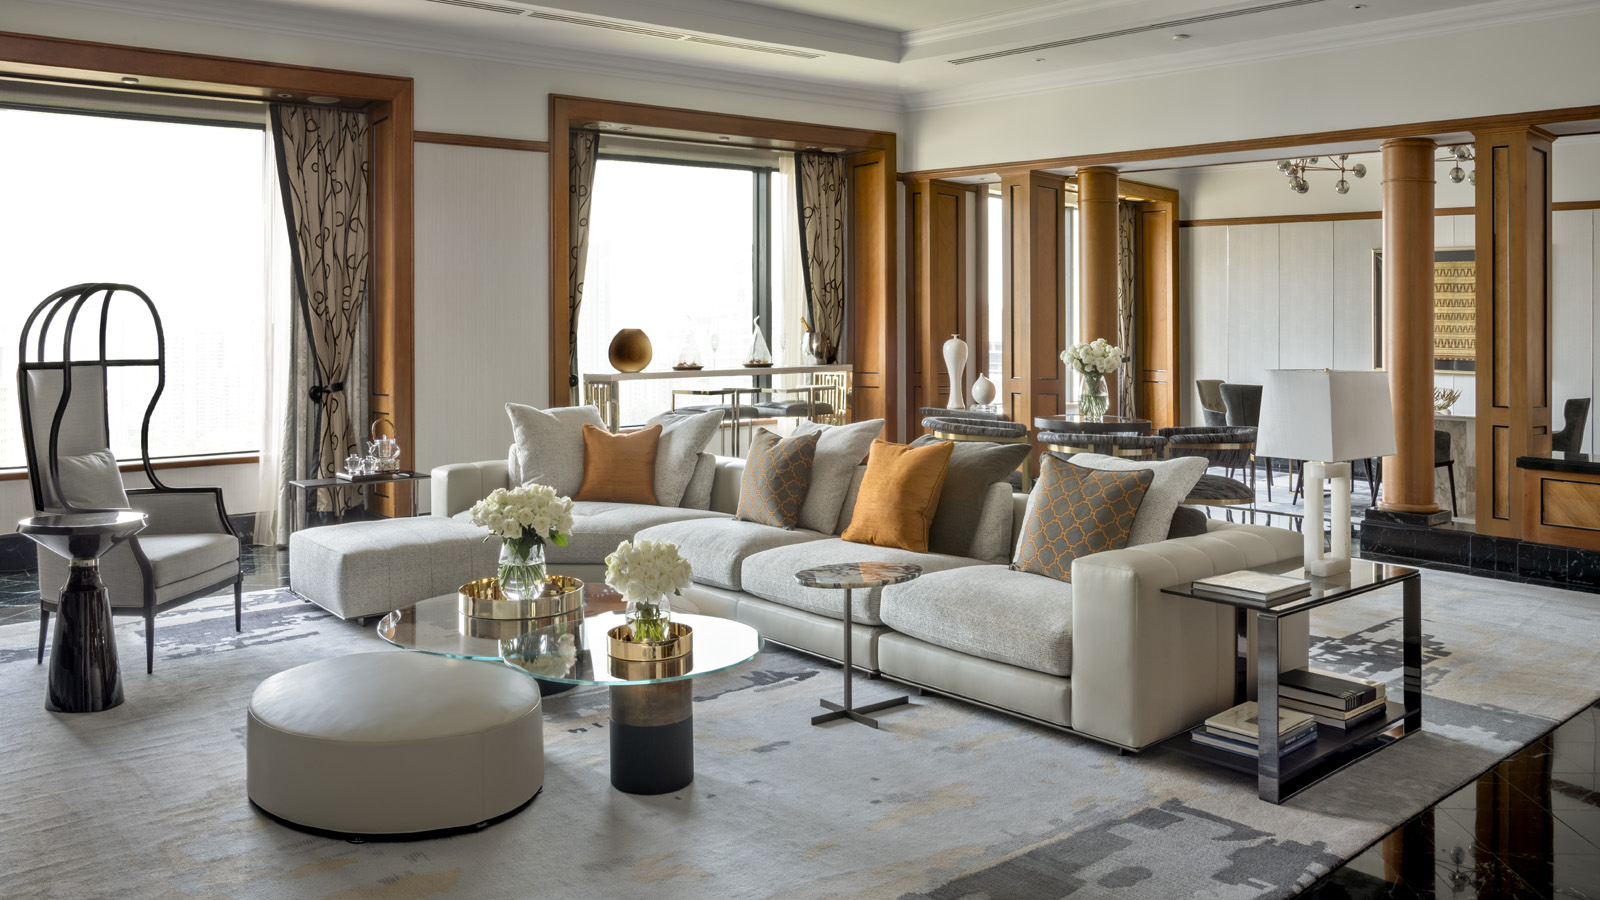 The Presidential Suite at the Four Seasons Hotel Singapore